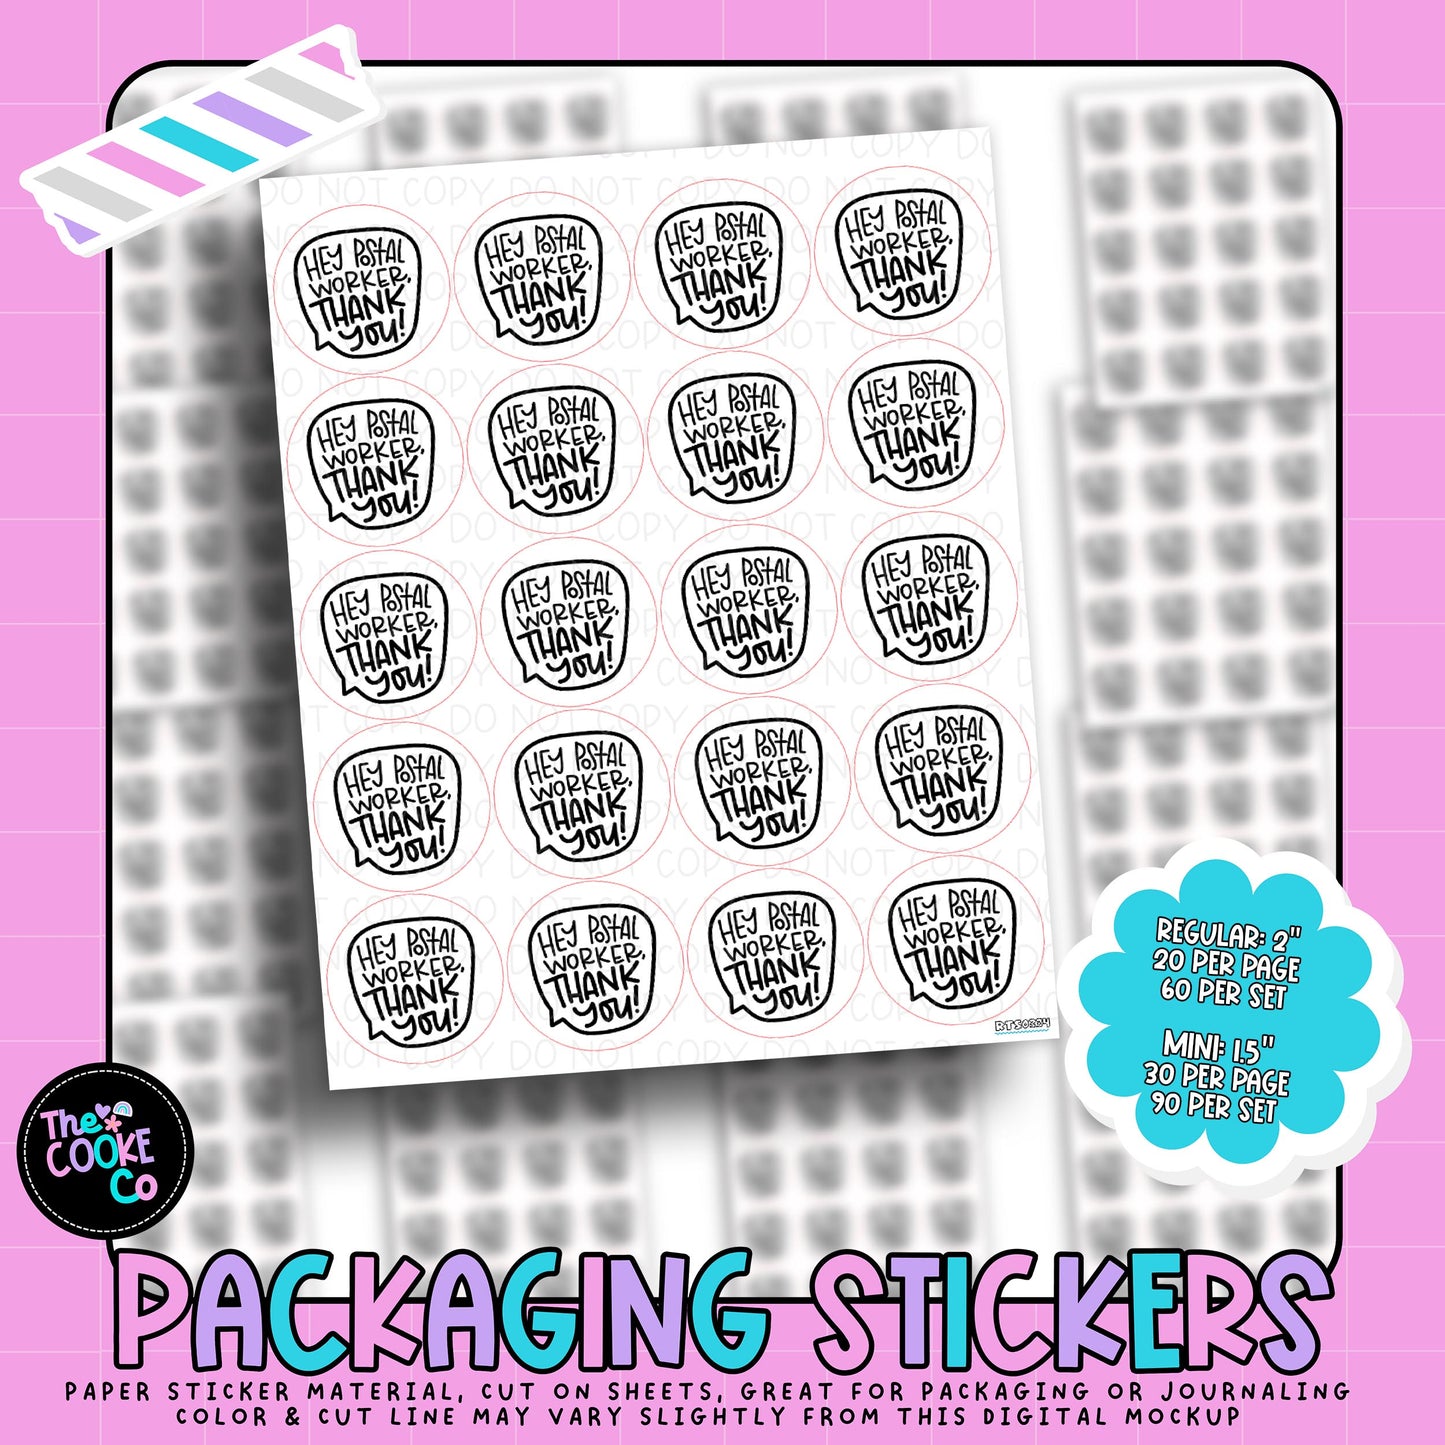 Packaging Stickers | #RTS0334 - HEY POSTAL WORKER, THANK YOU